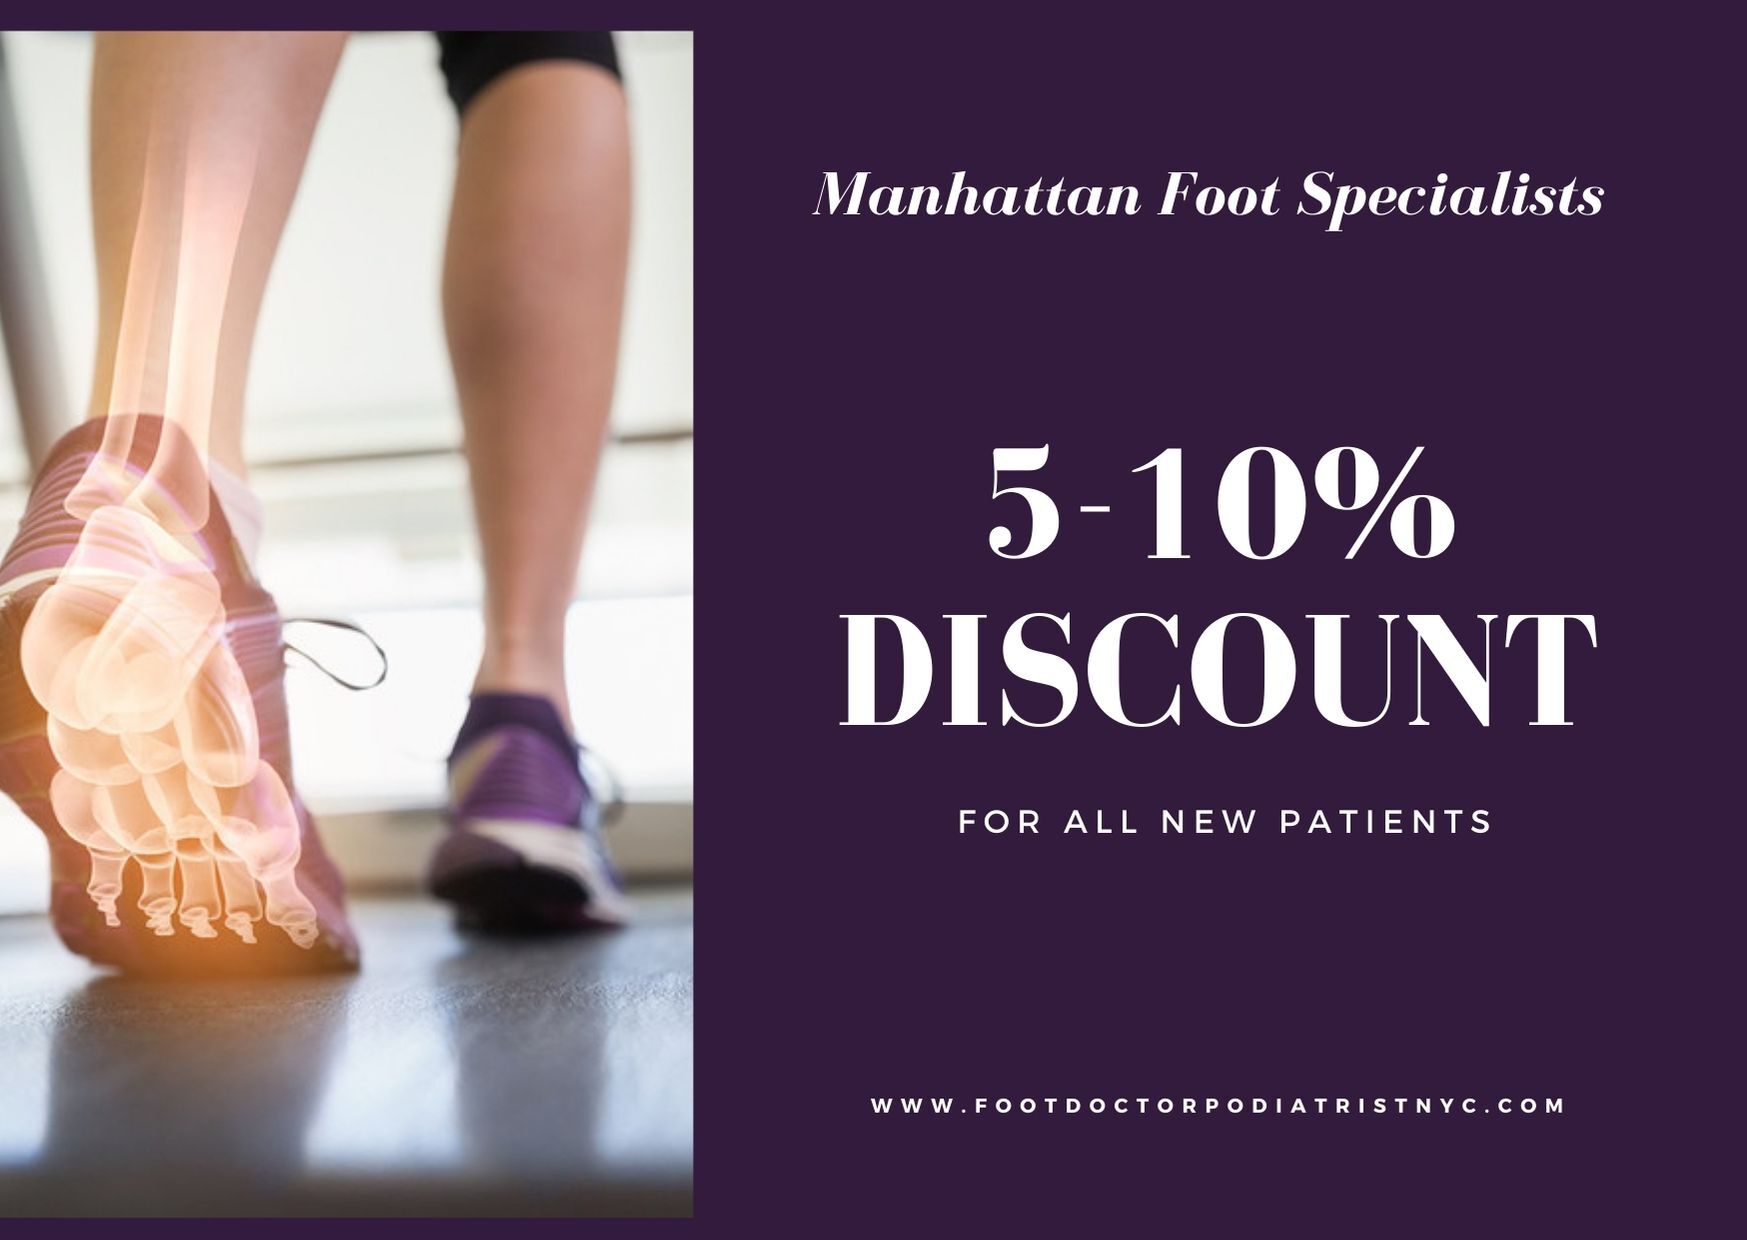 Manhattan Foot Specialists offers a discount., New York, United States